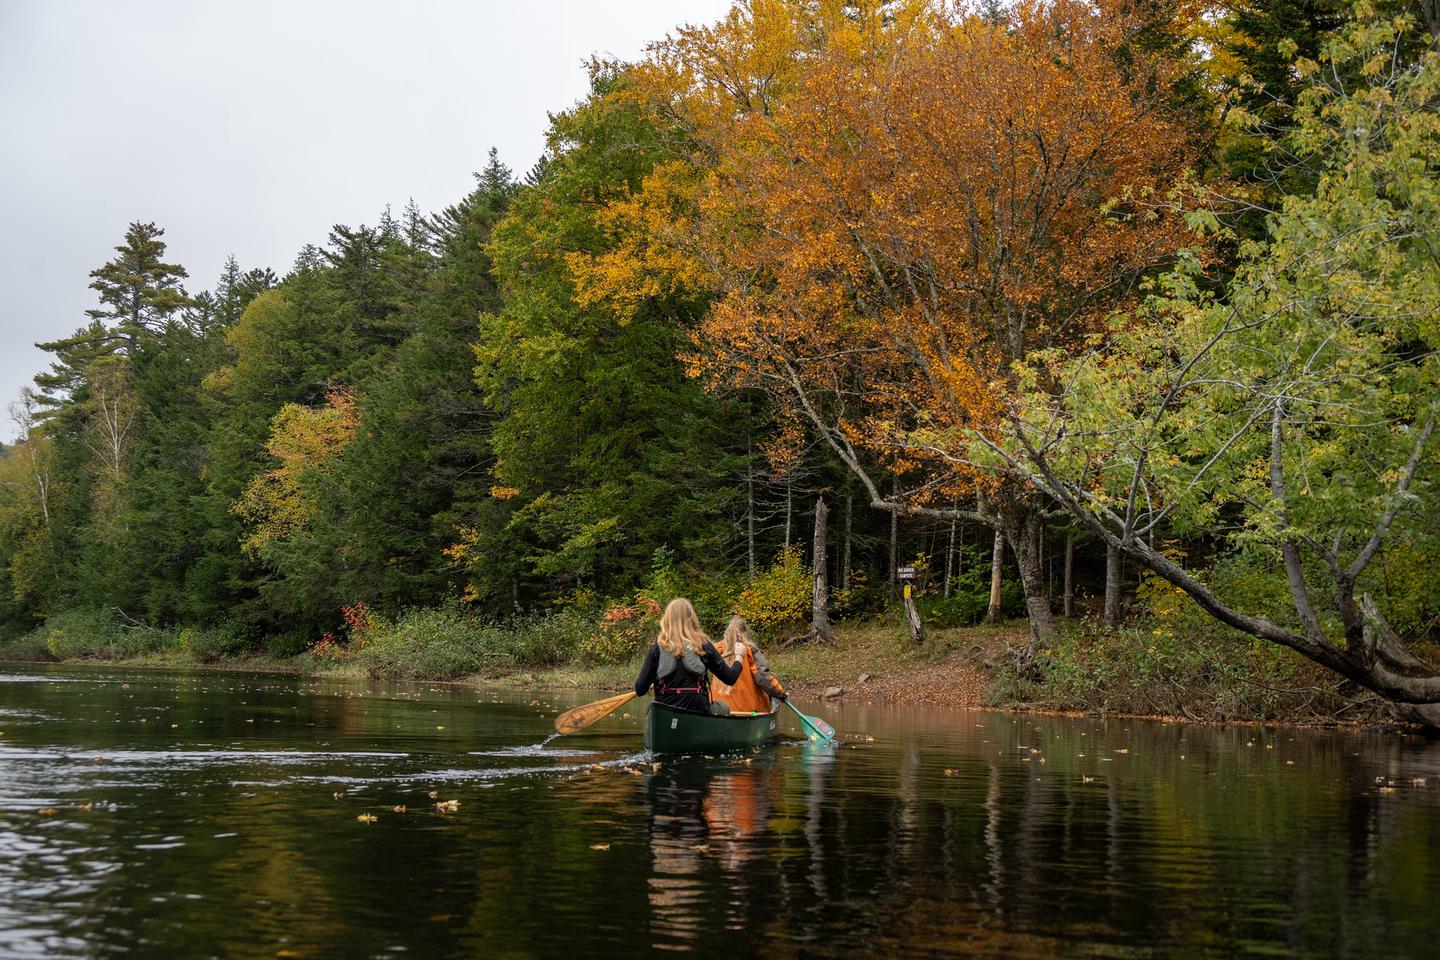 Two people in a canoe wearing life vests paddle towards Big Seboeis campsite from the calm river on an overcast day. The clearing starts with a small steep dirt ramp that goes up to a more flat grassy area.Paddle the East Branch of the Penobscot River to Big Seboeis campsite!